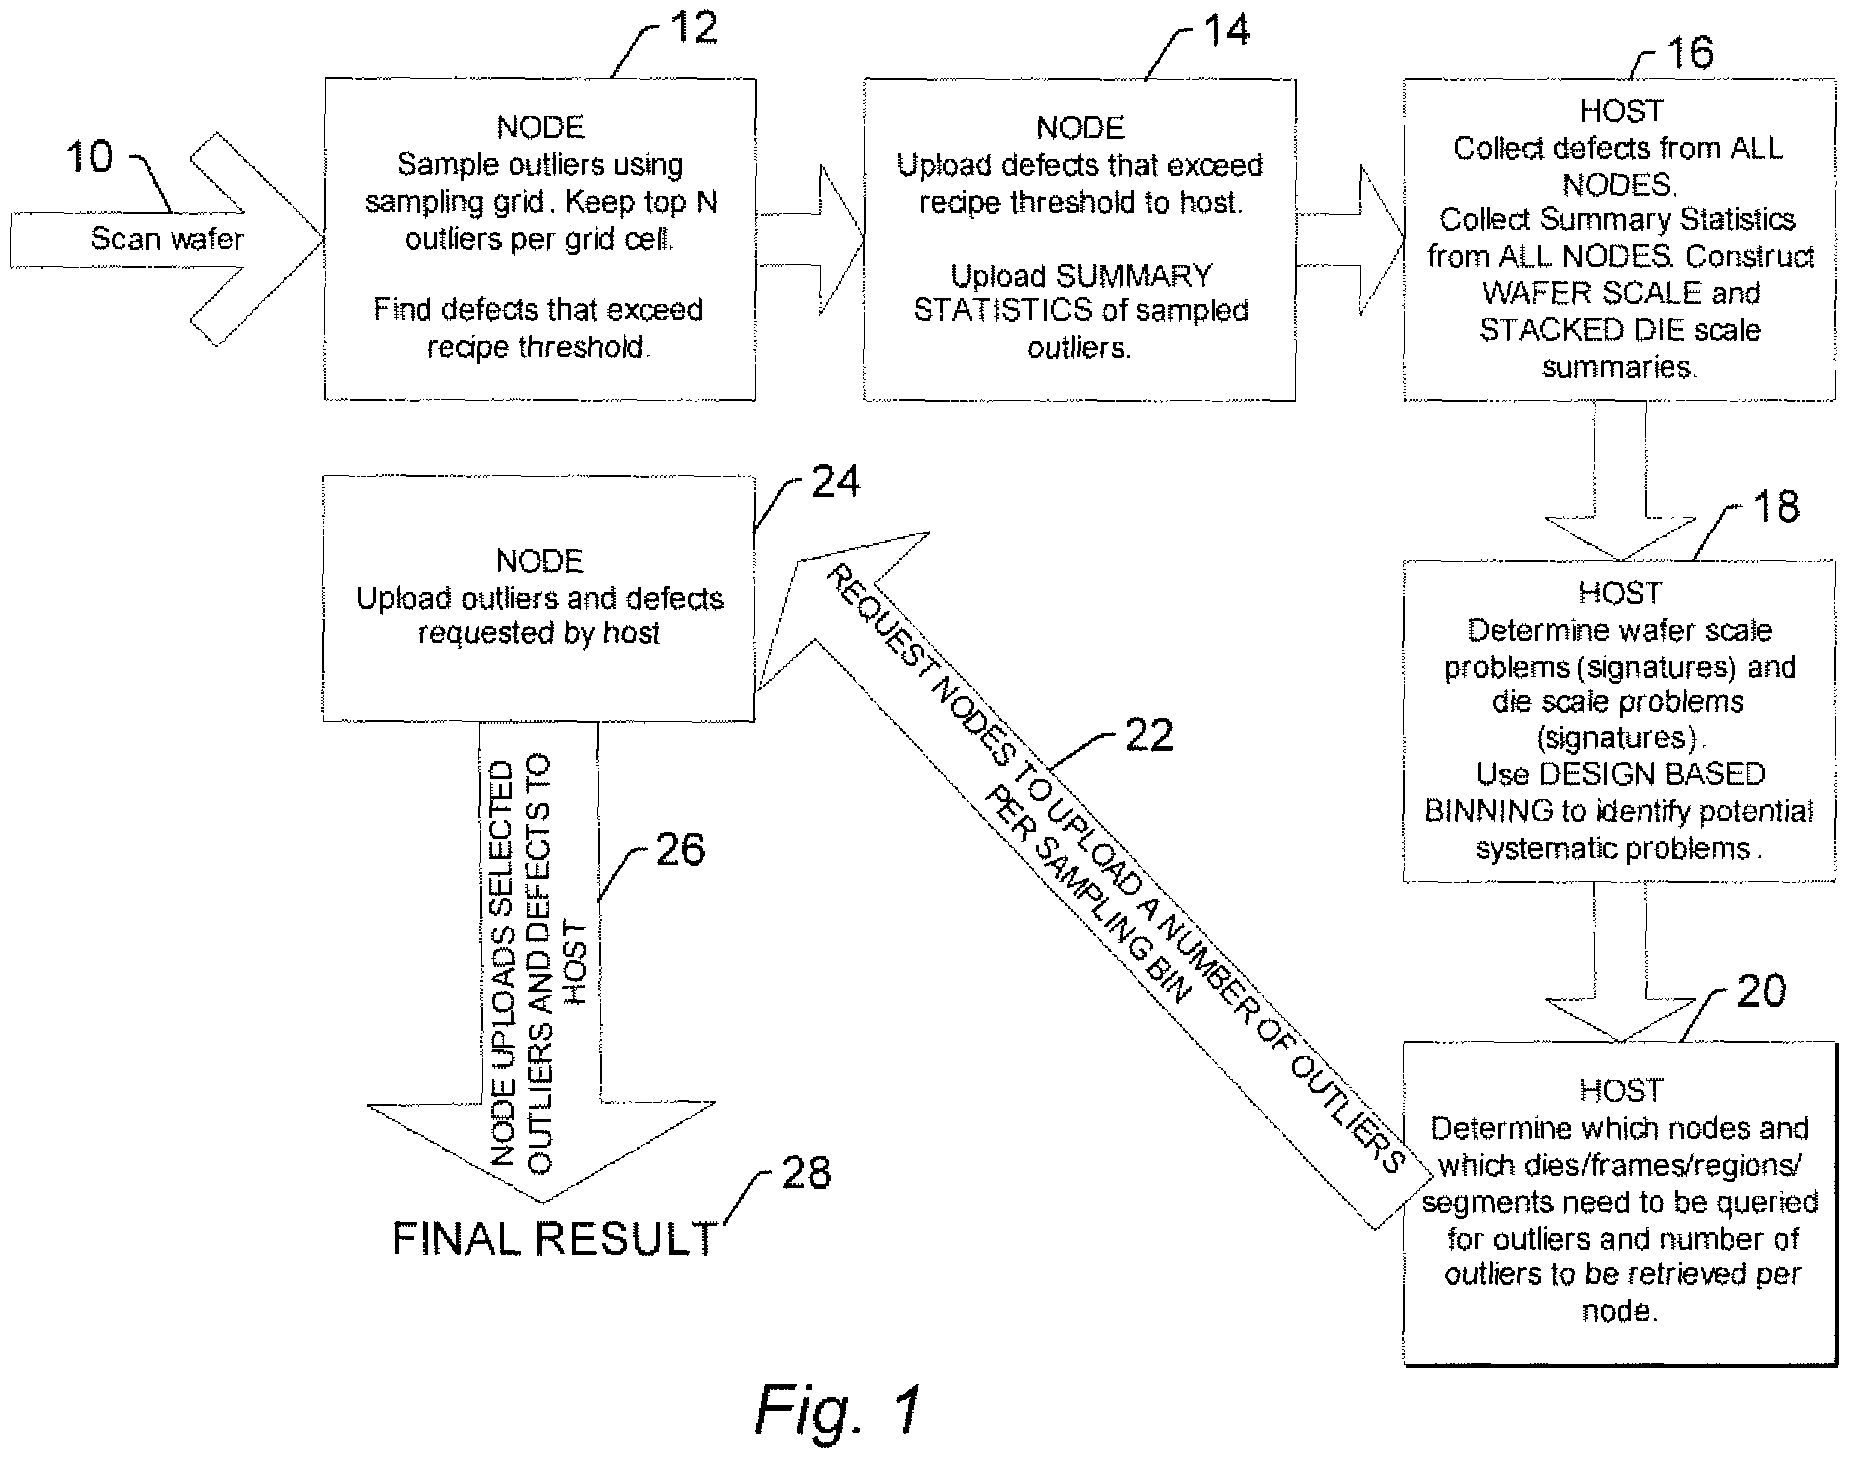 Systems and methods for detecting defects on a wafer and generating inspection results for the wafer